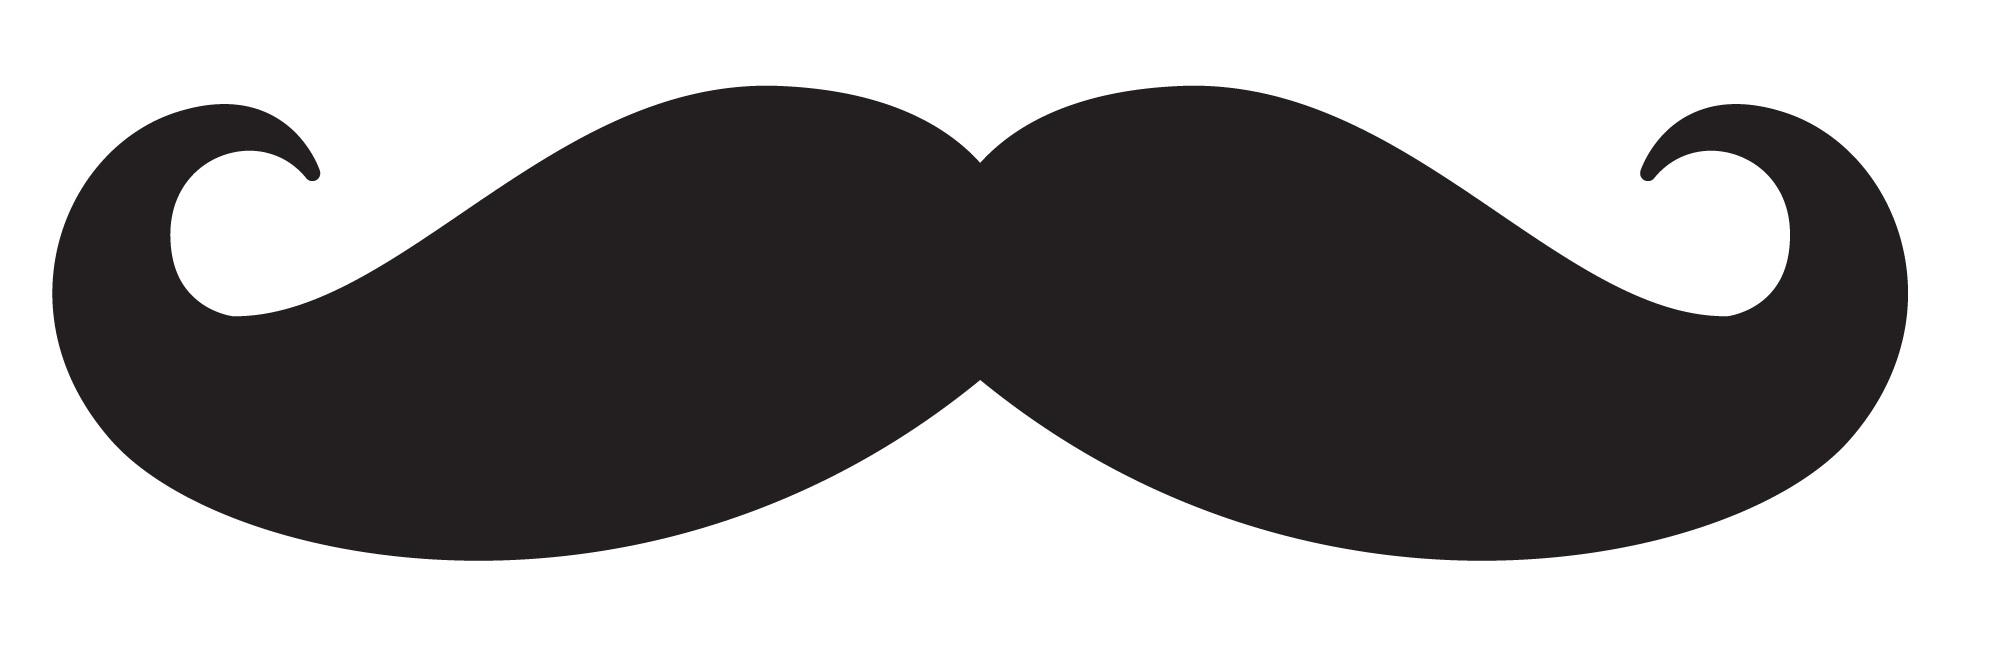 Free Mustache Cliparts Printables Download Free Mustache Cliparts